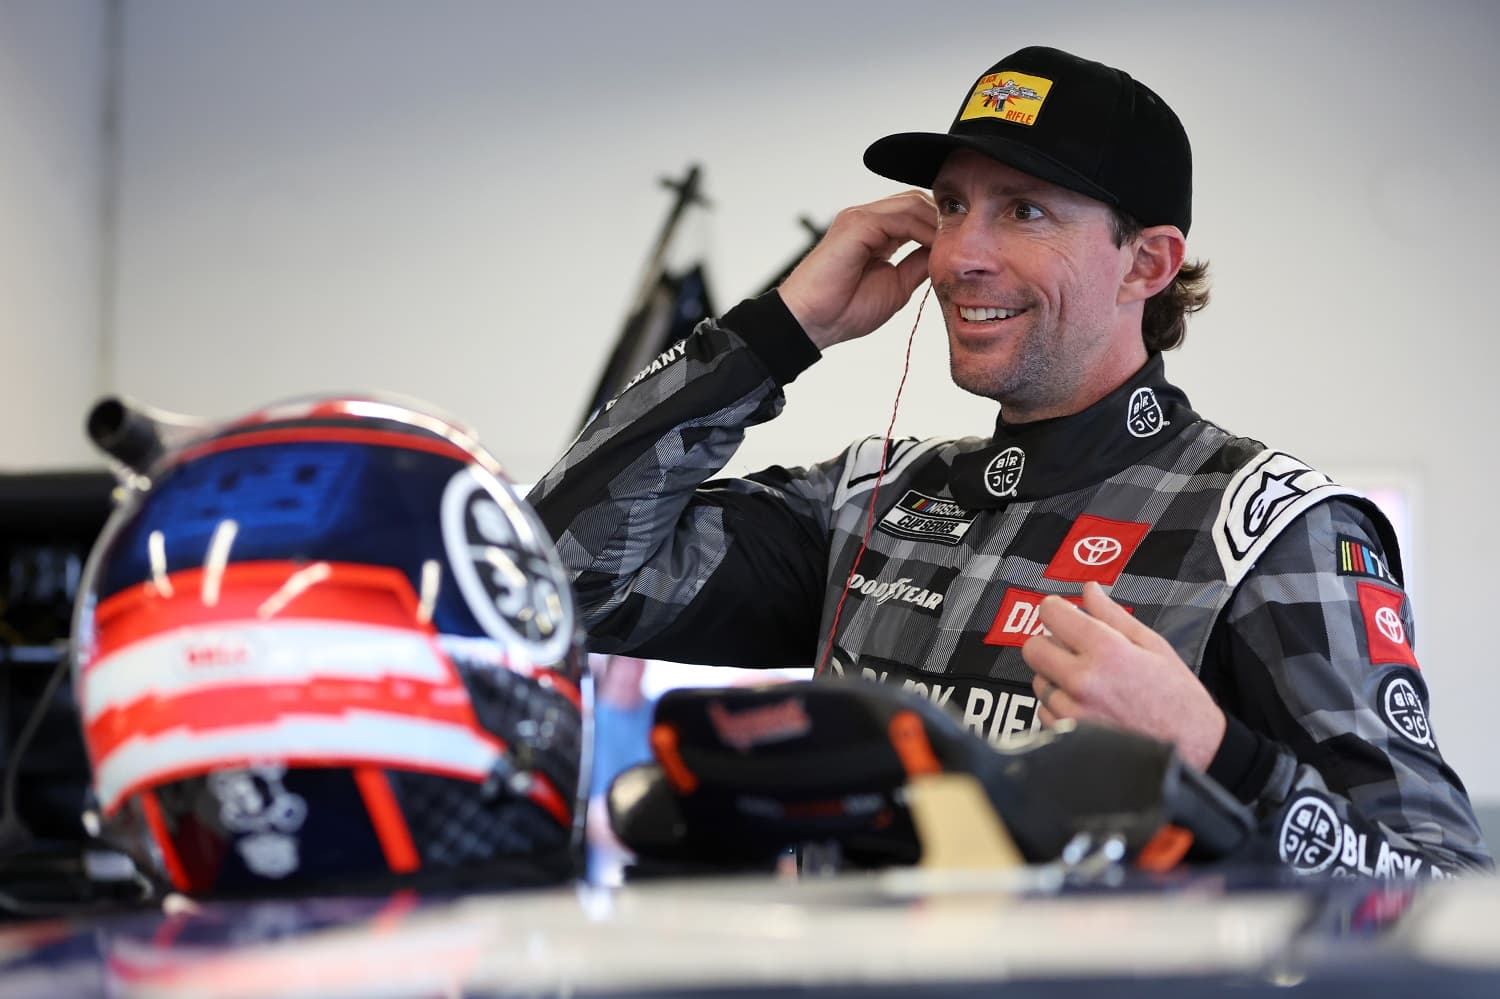 Travis Pastrana prepares in the garage area during practice for the NASCAR Cup Series Daytona 500 at Daytona International Speedway on Feb. 17, 2023.